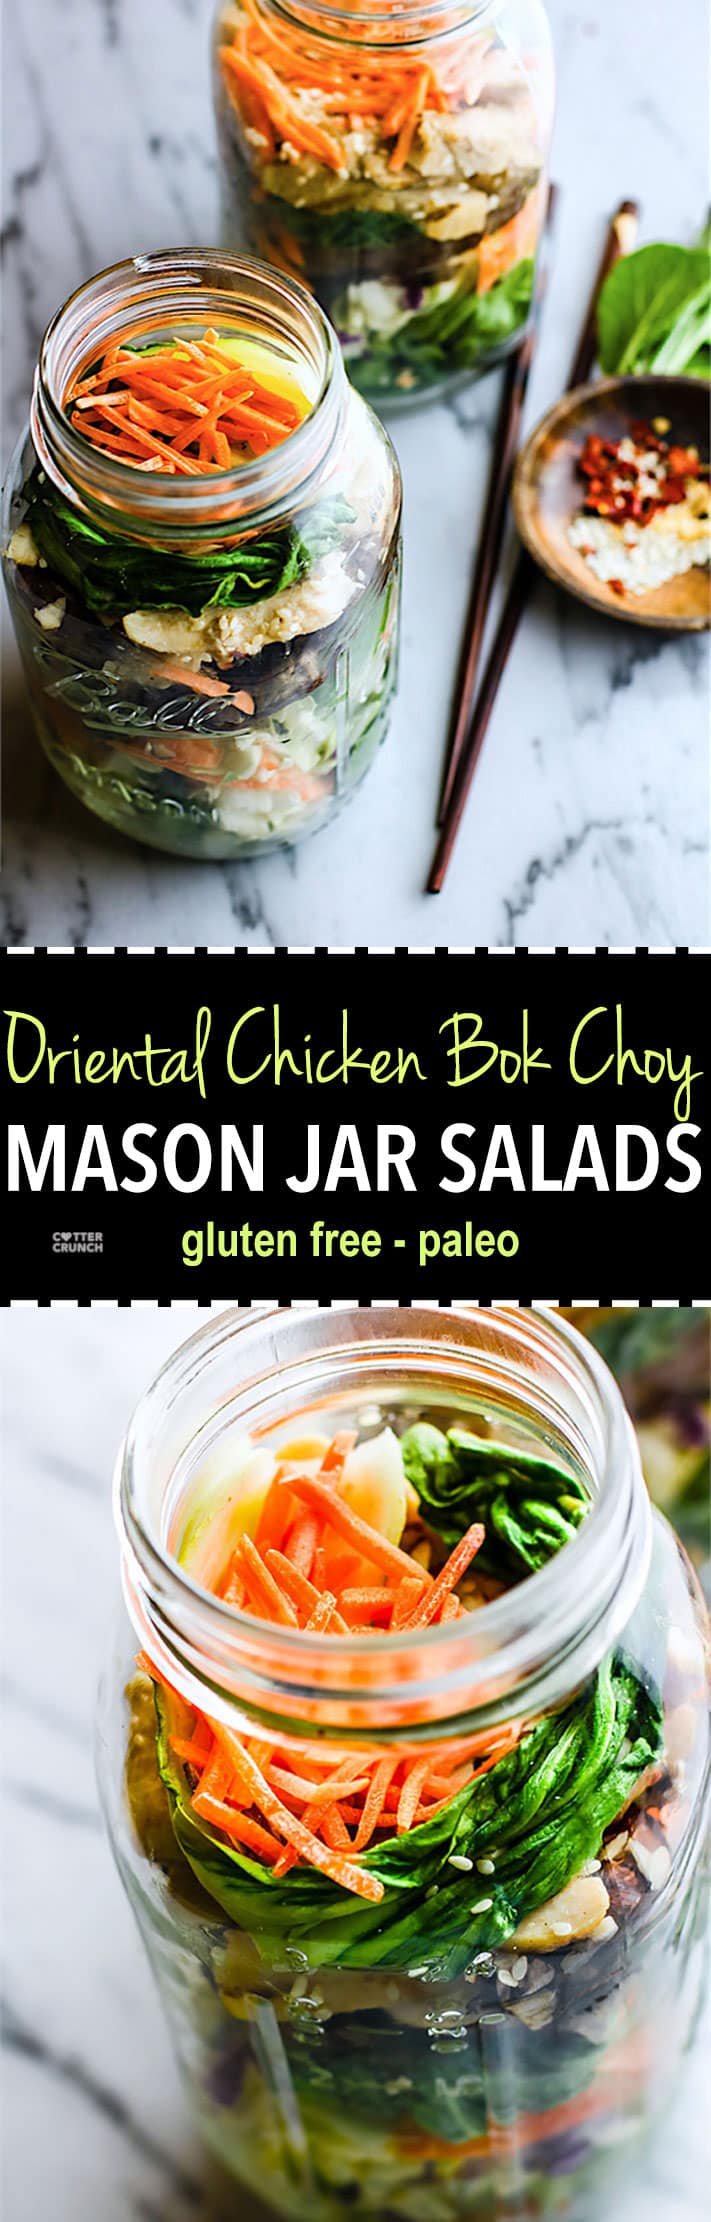 Easy Oriental Chicken Bok Choy Mason Jar Salads! Light, Gluten Free, and Paleo friendly oriental style mason jar salads that are great for lunch or dinners on the go! Perfect use of leftover vegetables and grilled or stir fried chicken as well. Portable Healthy lunches and so easy. 